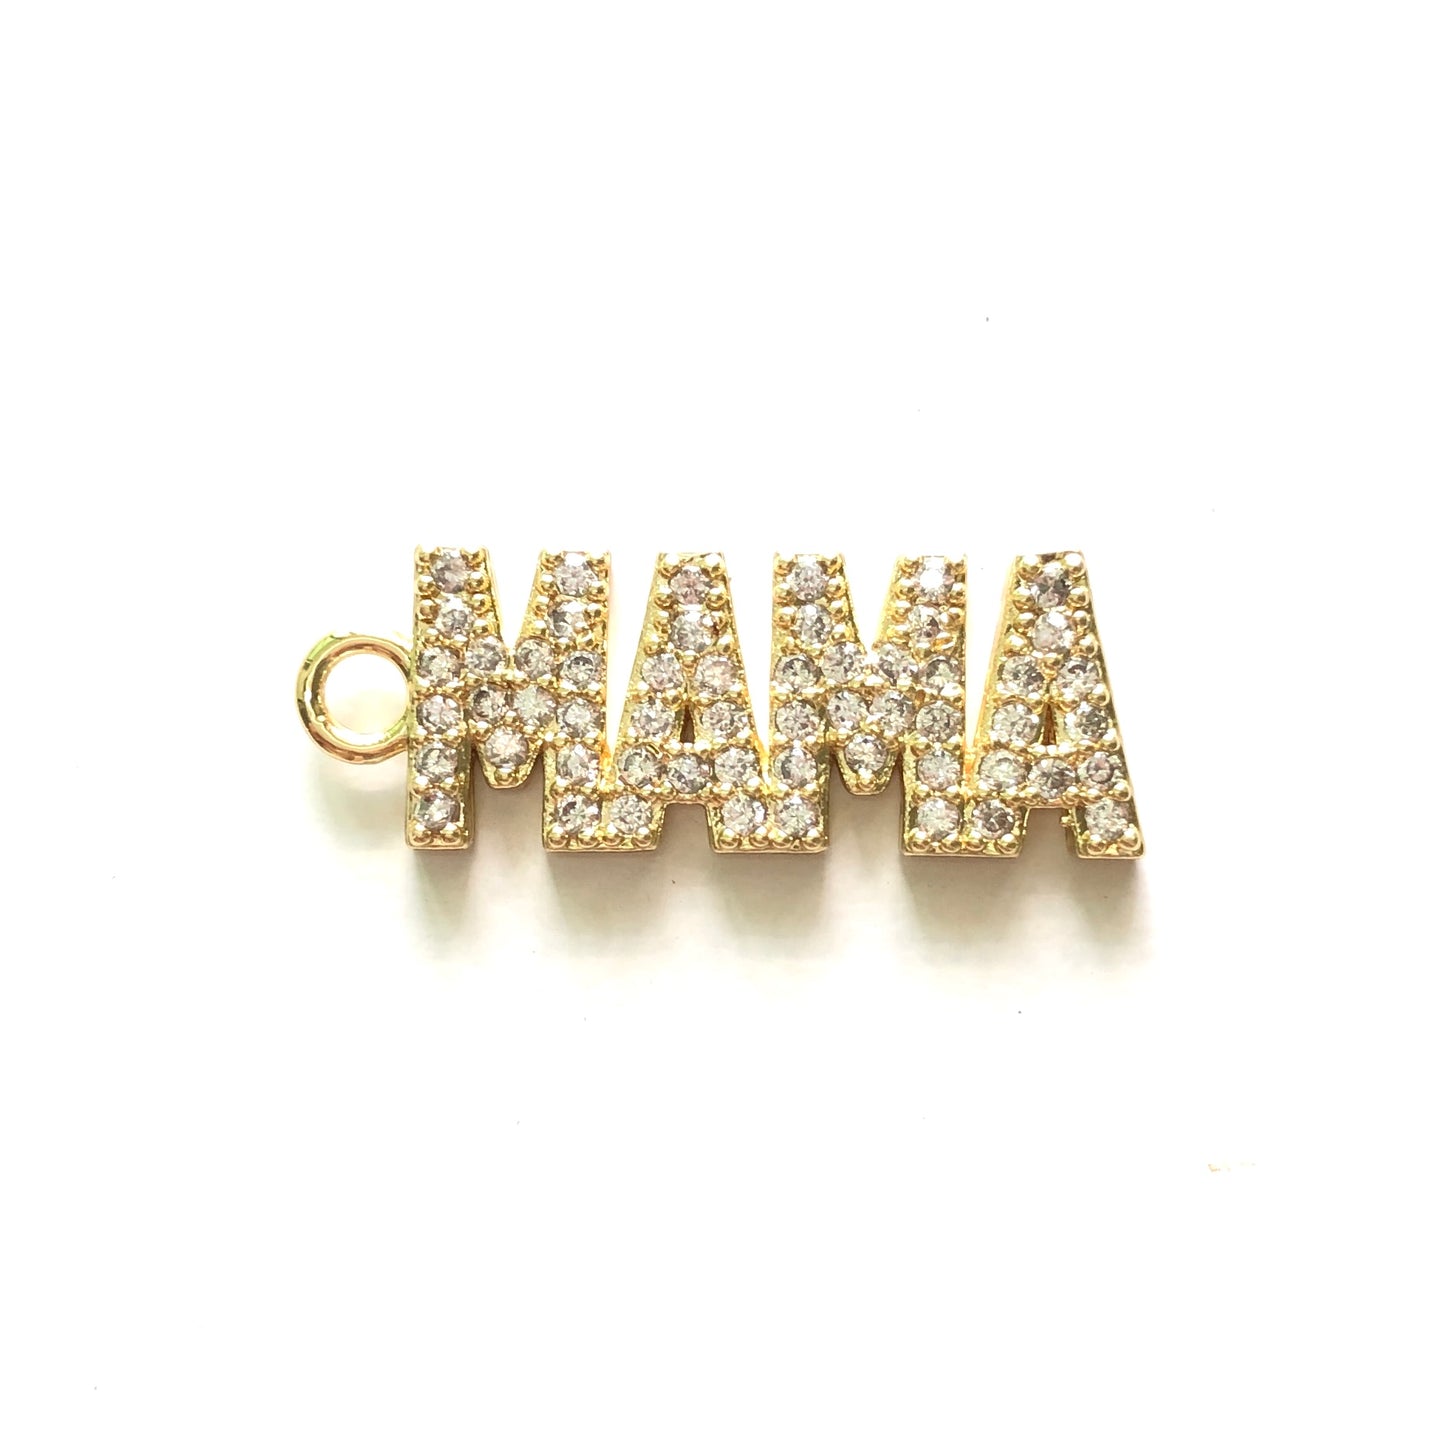 10pcs/lot 31*11mm CZ Paved Mama Charms for Mother's Day Gold CZ Paved Charms Mother's Day Words & Quotes Charms Beads Beyond